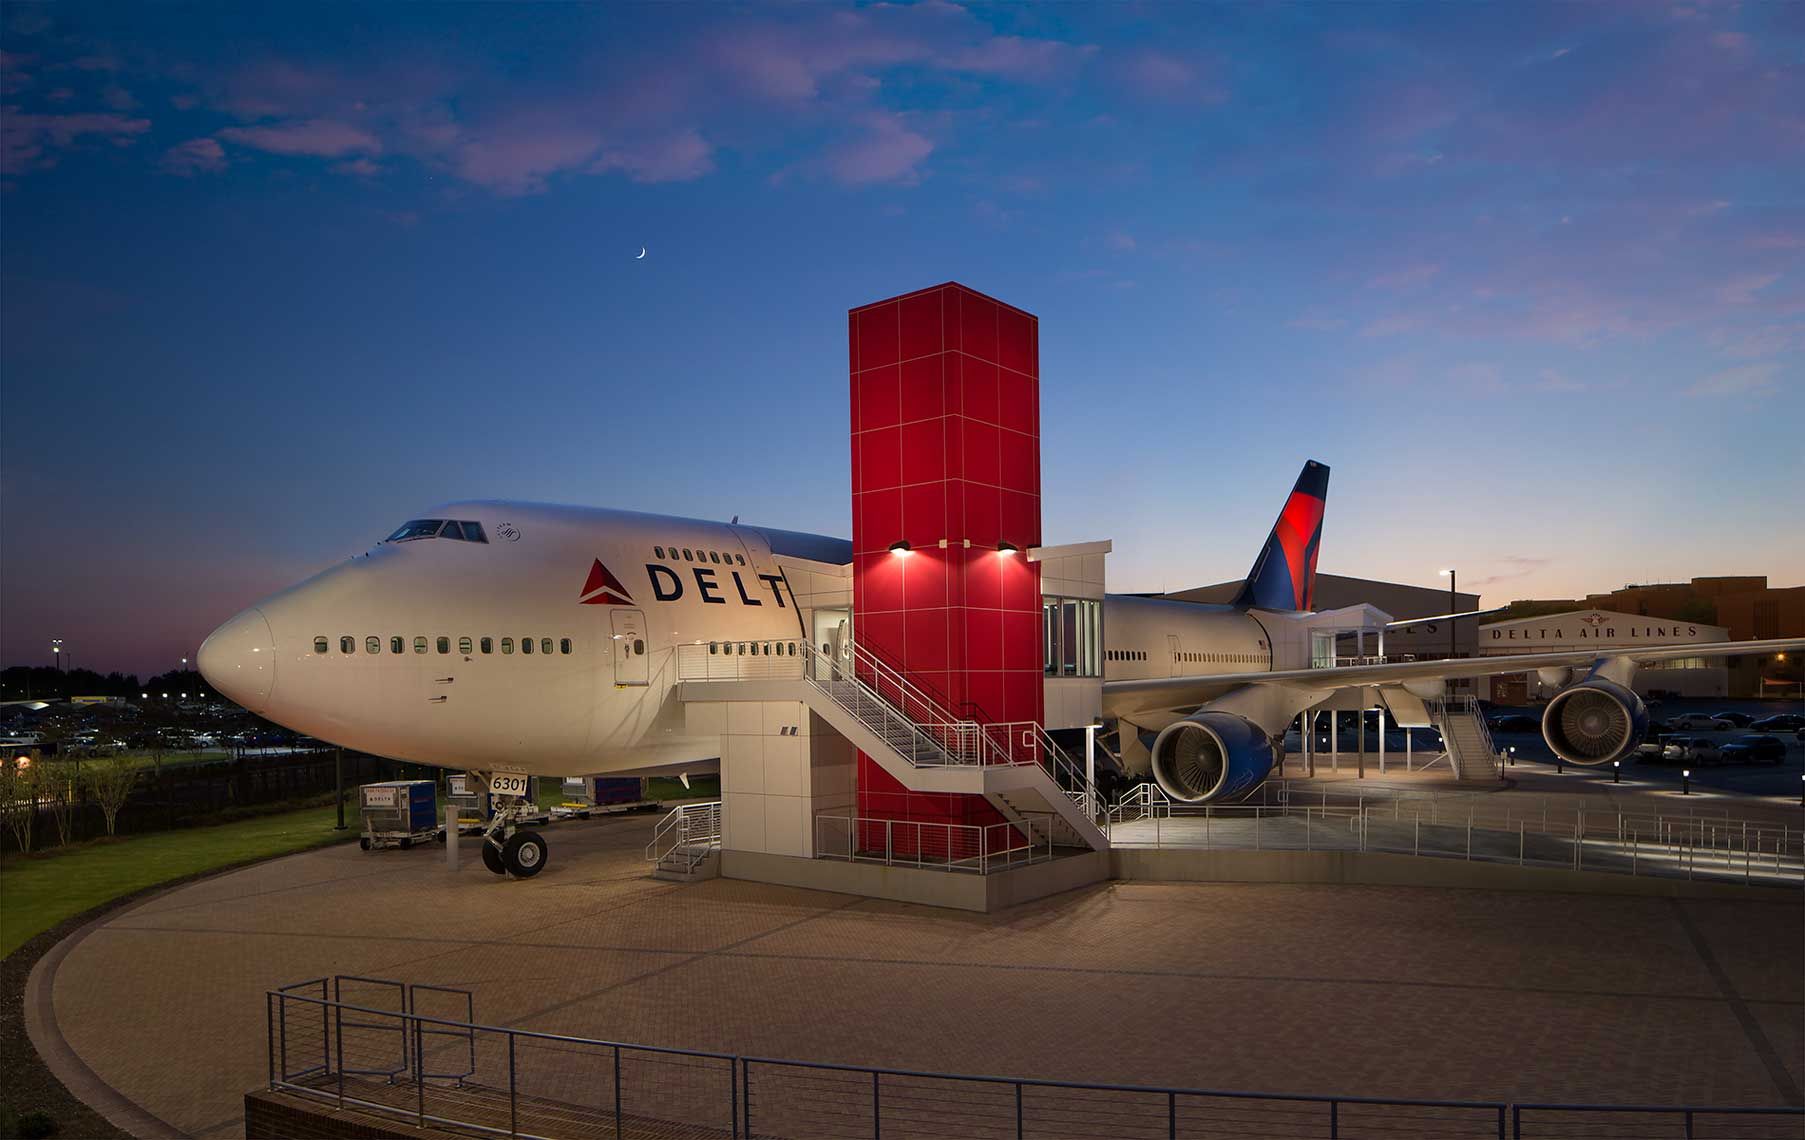 Exterior twilight view of the 747 museum exhibit on the tarmac at the Delta Flight Museum